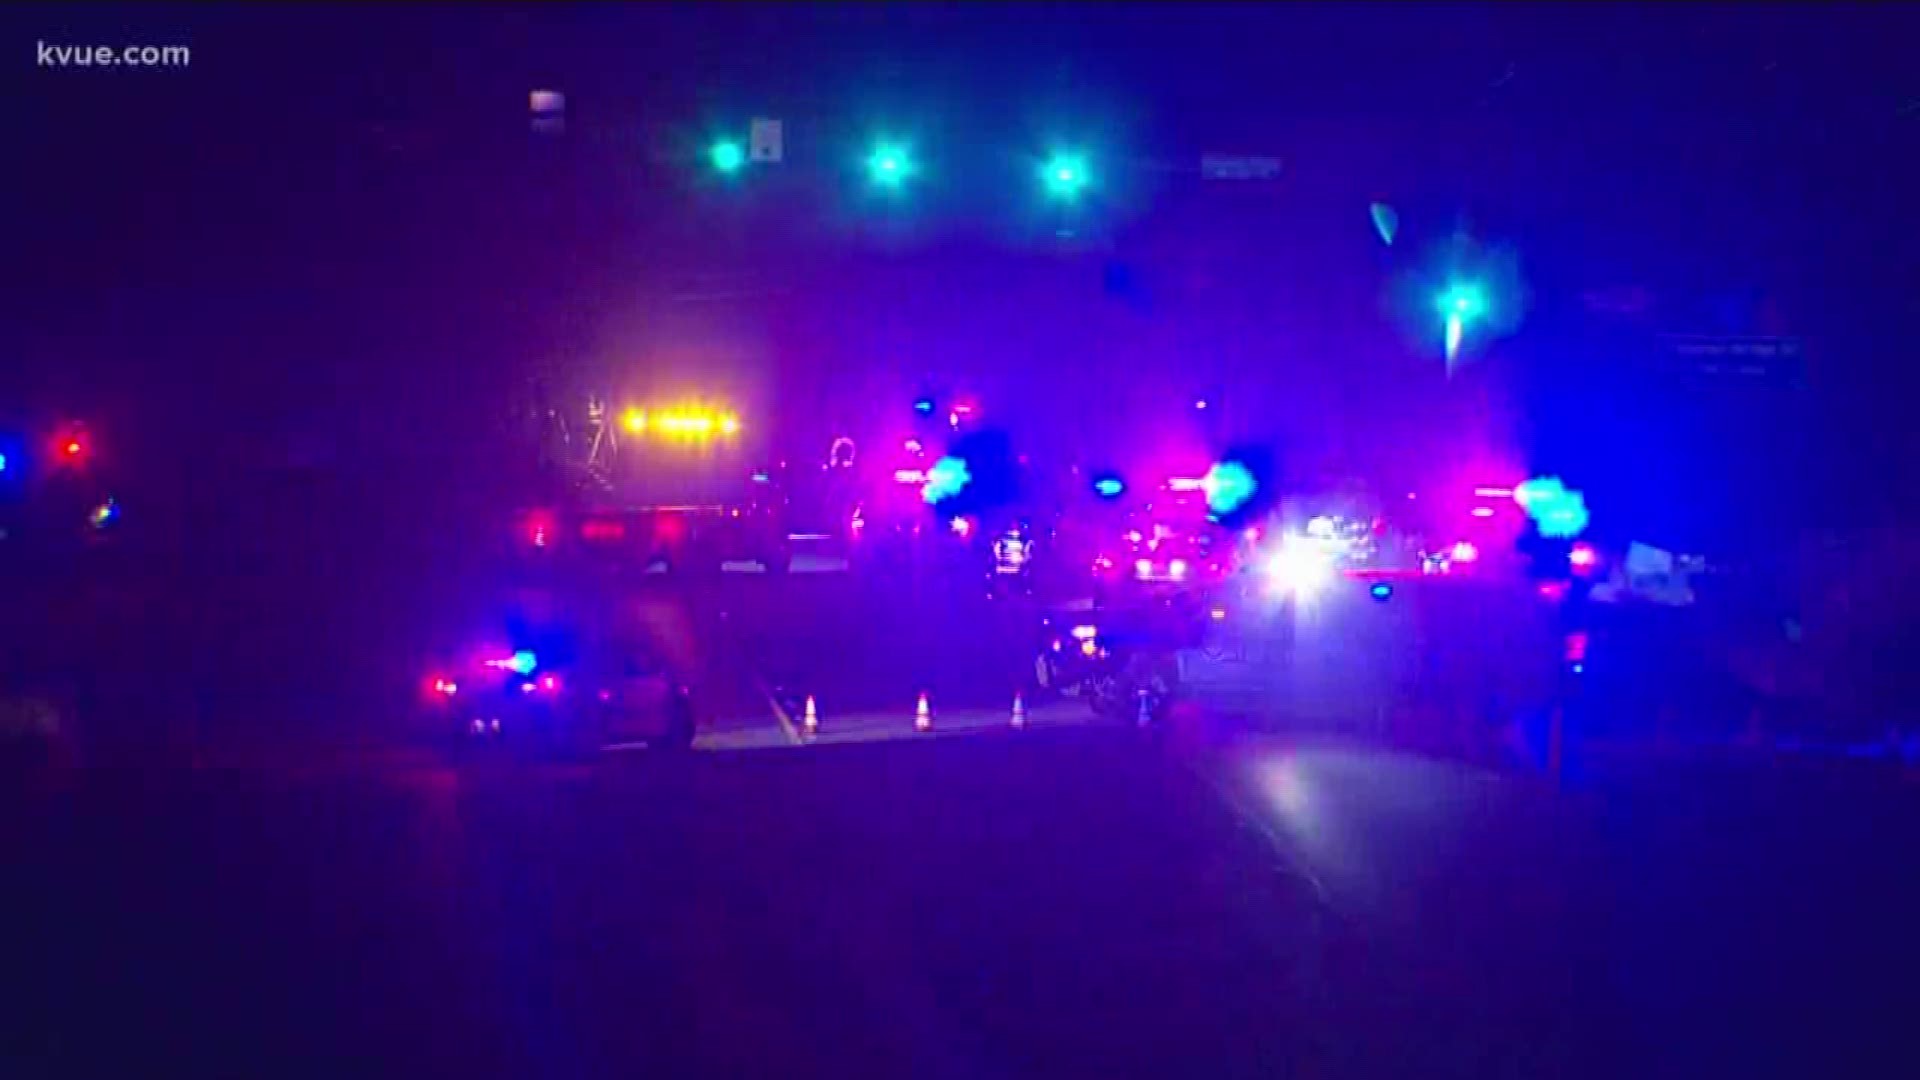 According to Travis County Department of Public Safety, one vehicle crashed at 1:28 a.m. after a police chase lead by the Travis County Sheriff's Office.